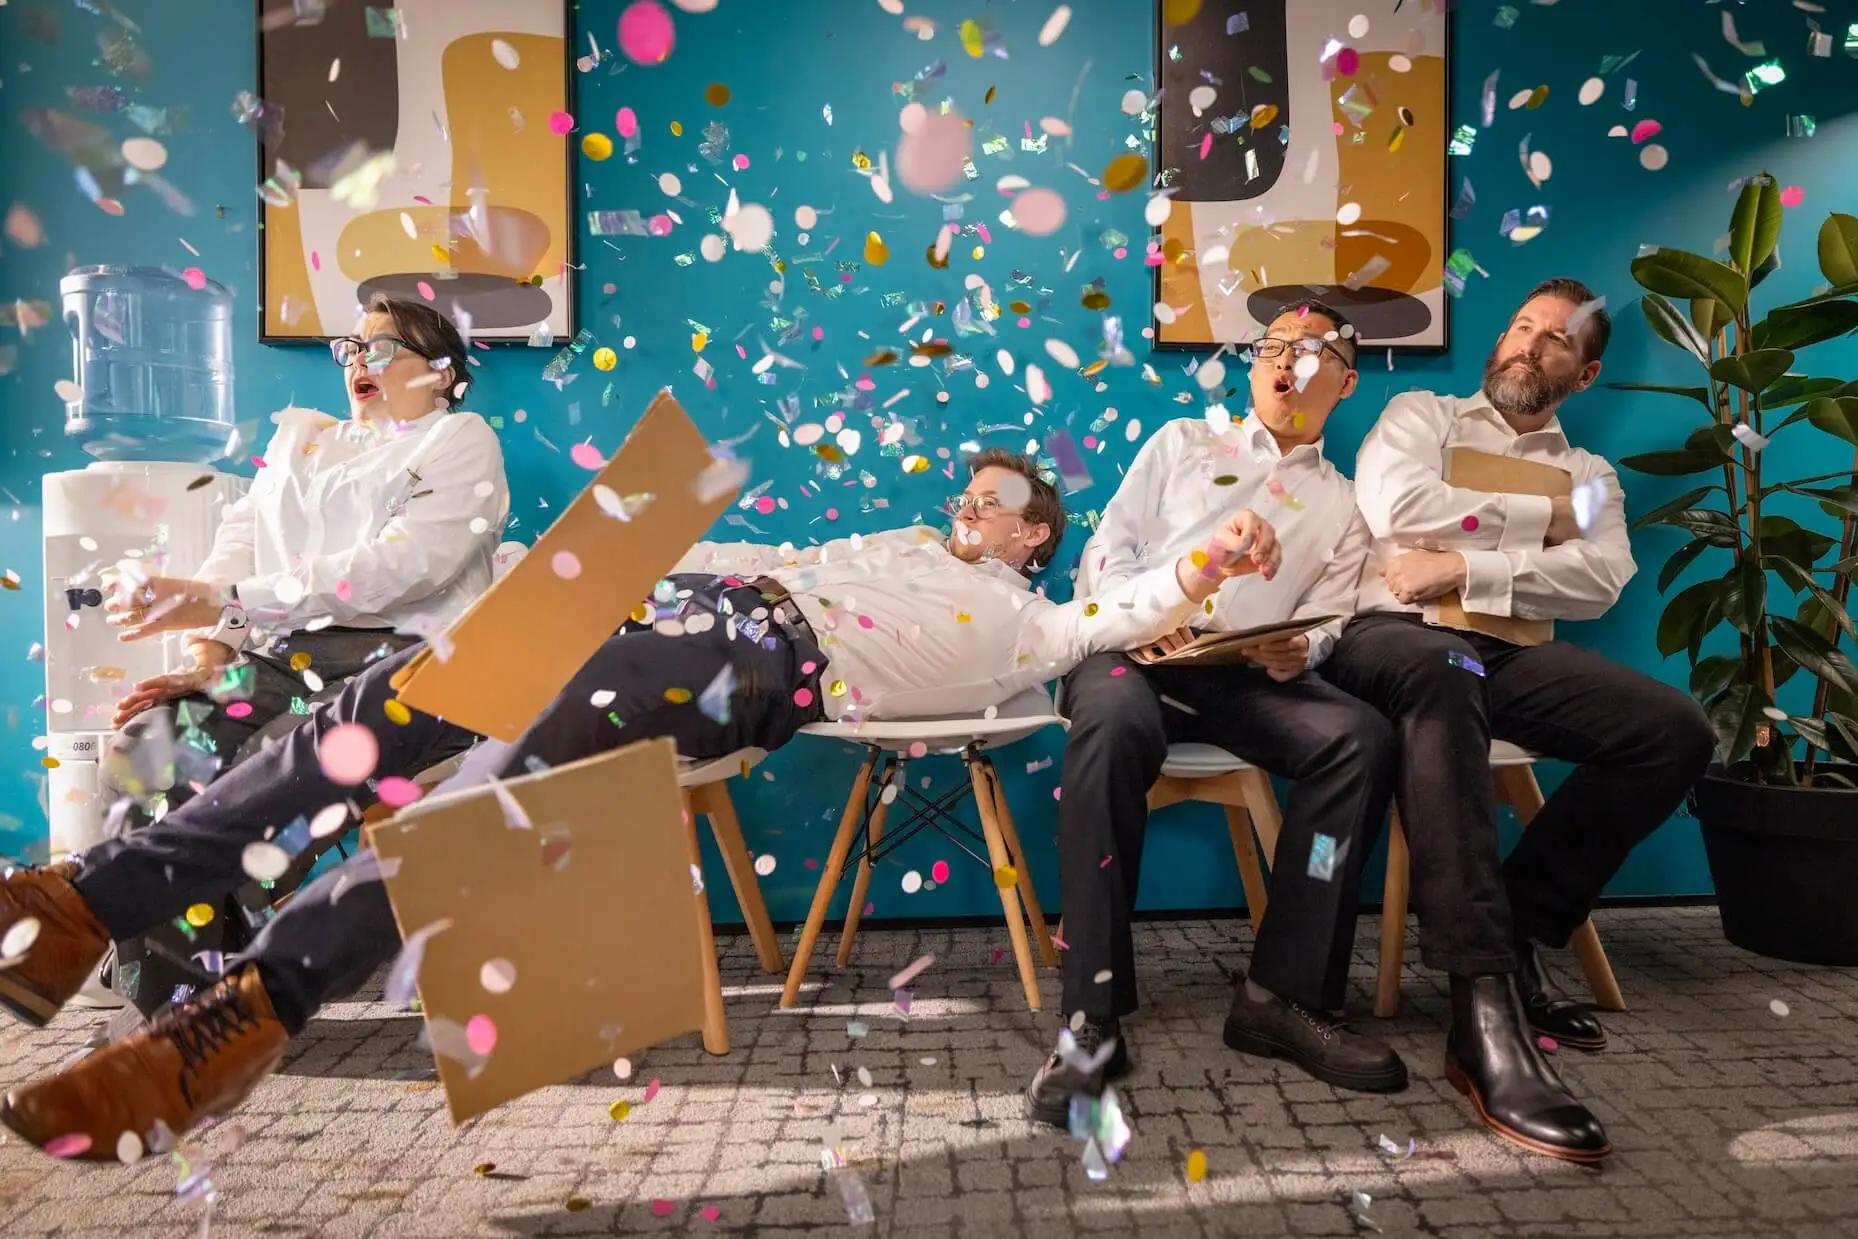 Four people in business attire get surprised as confetti bursts around them in a vibrant office lounge.